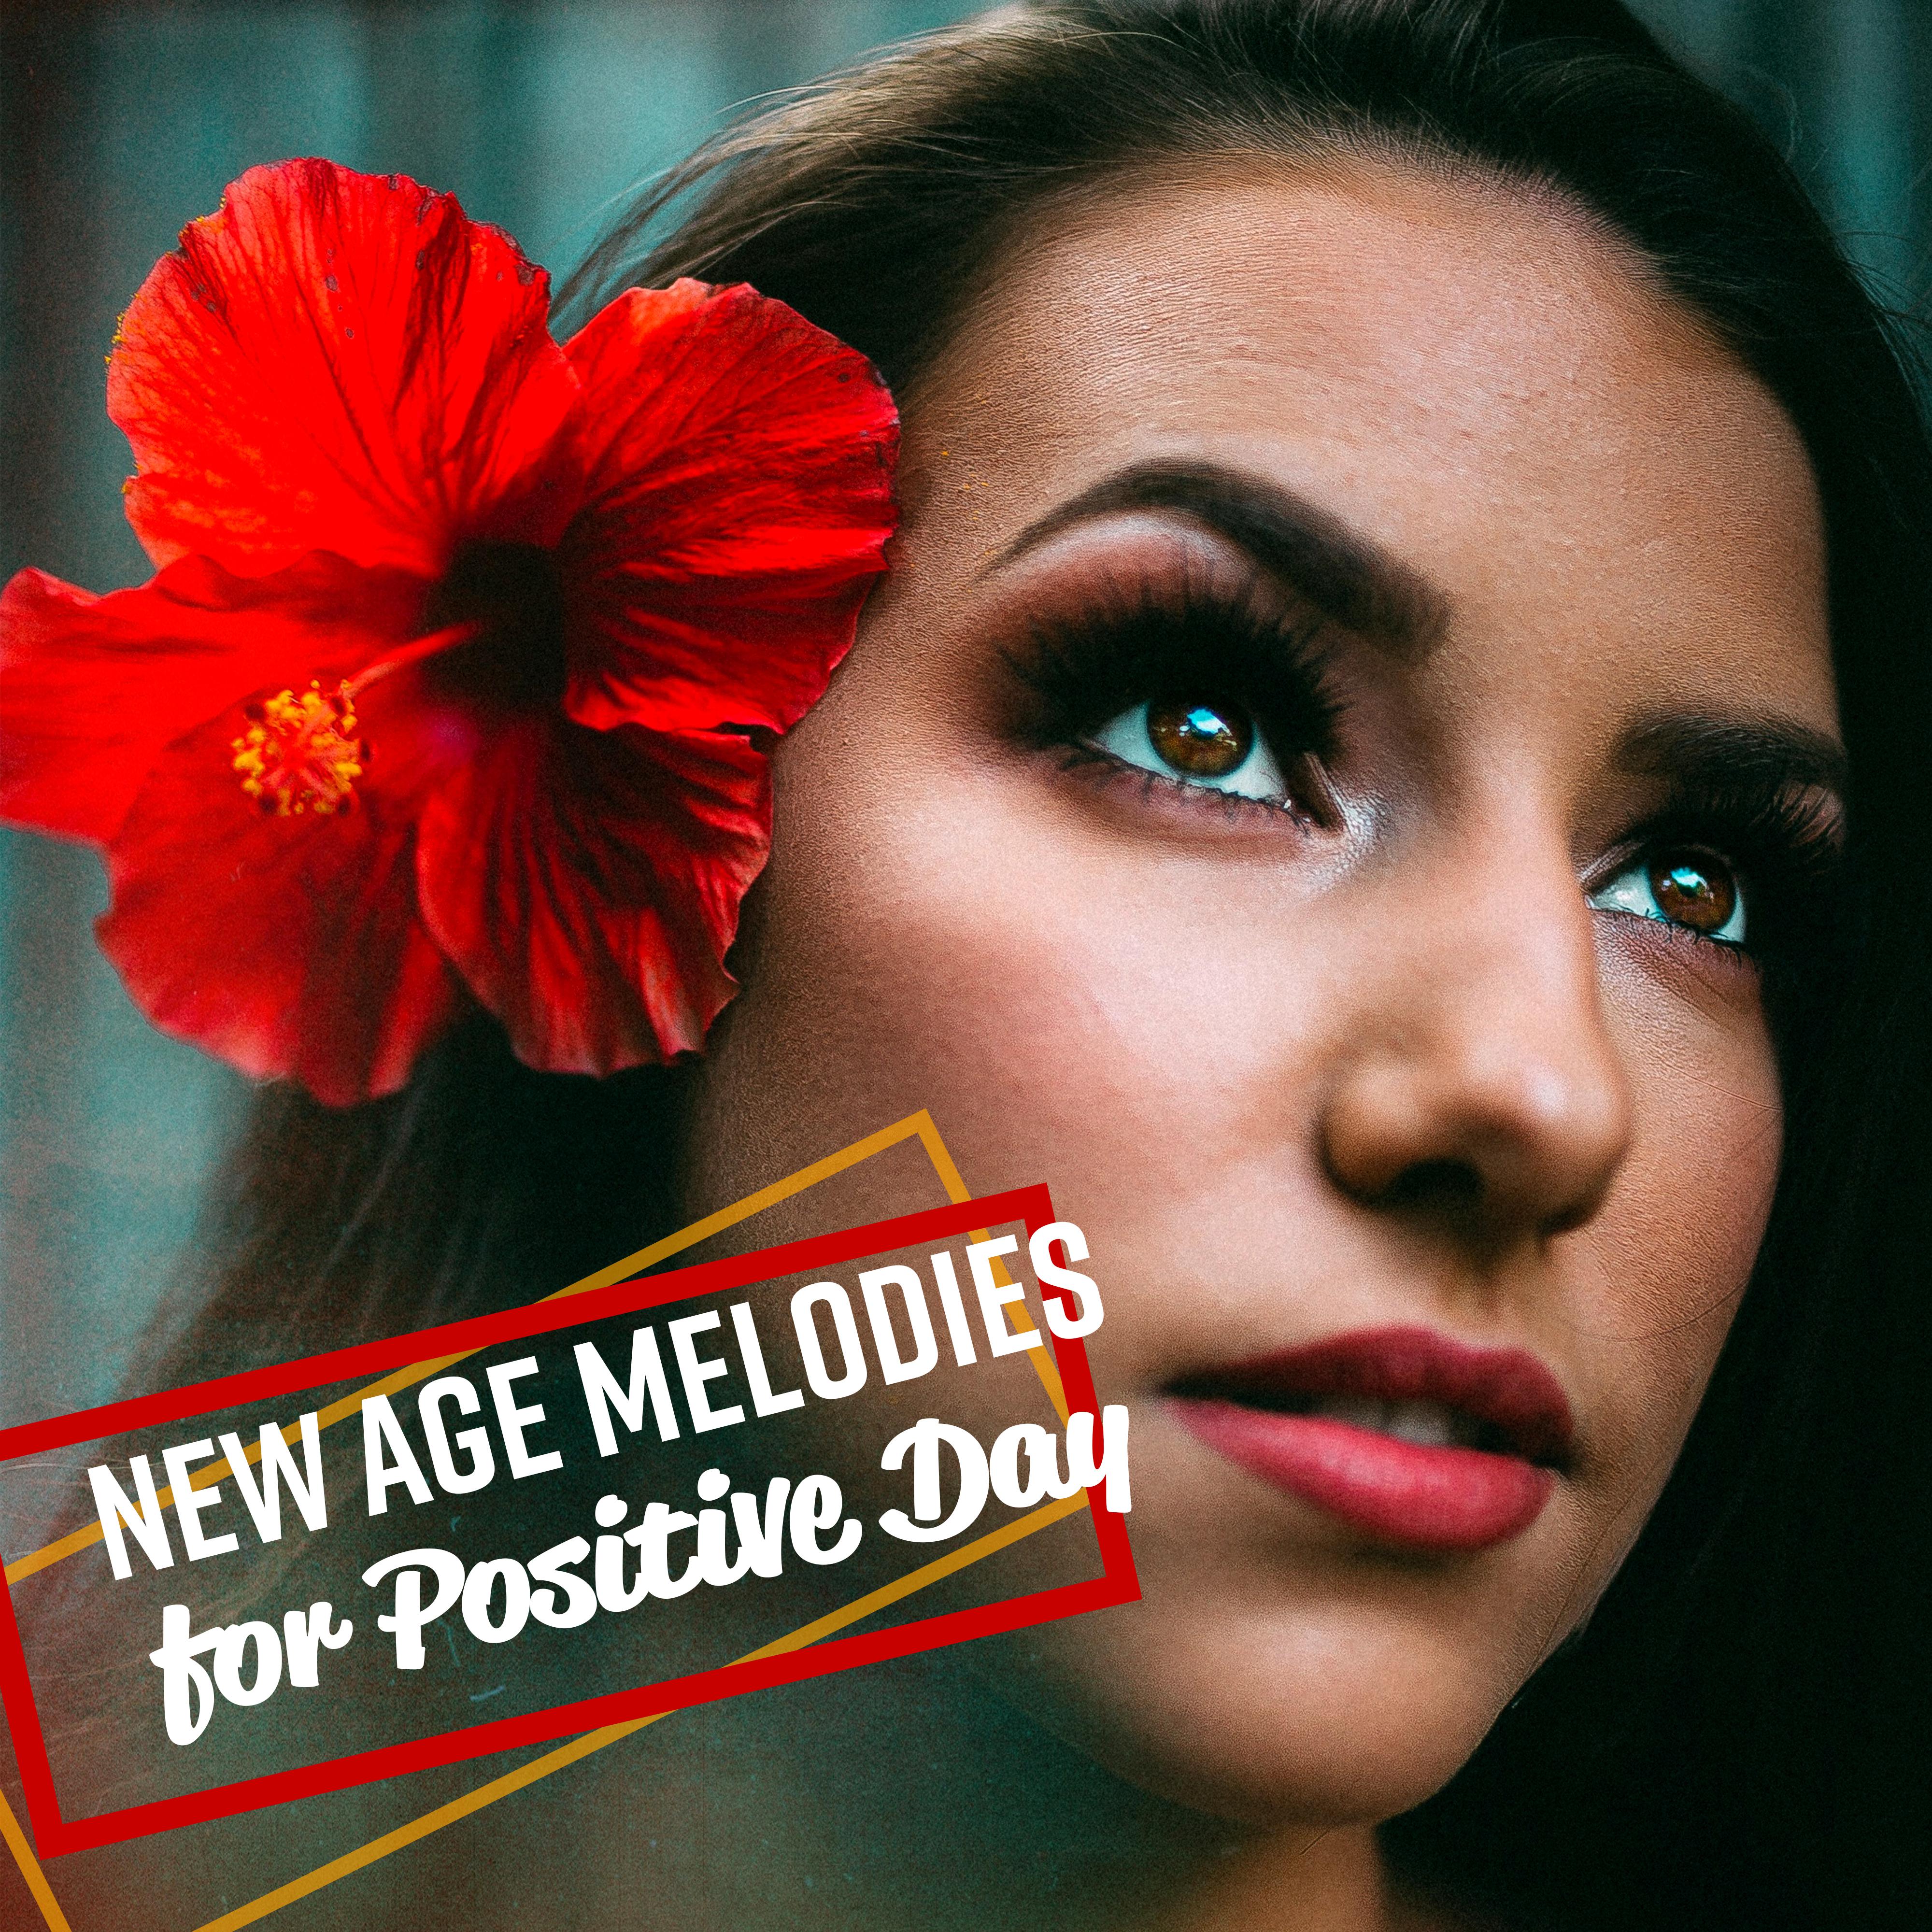 New Age Melodies for Positive Day